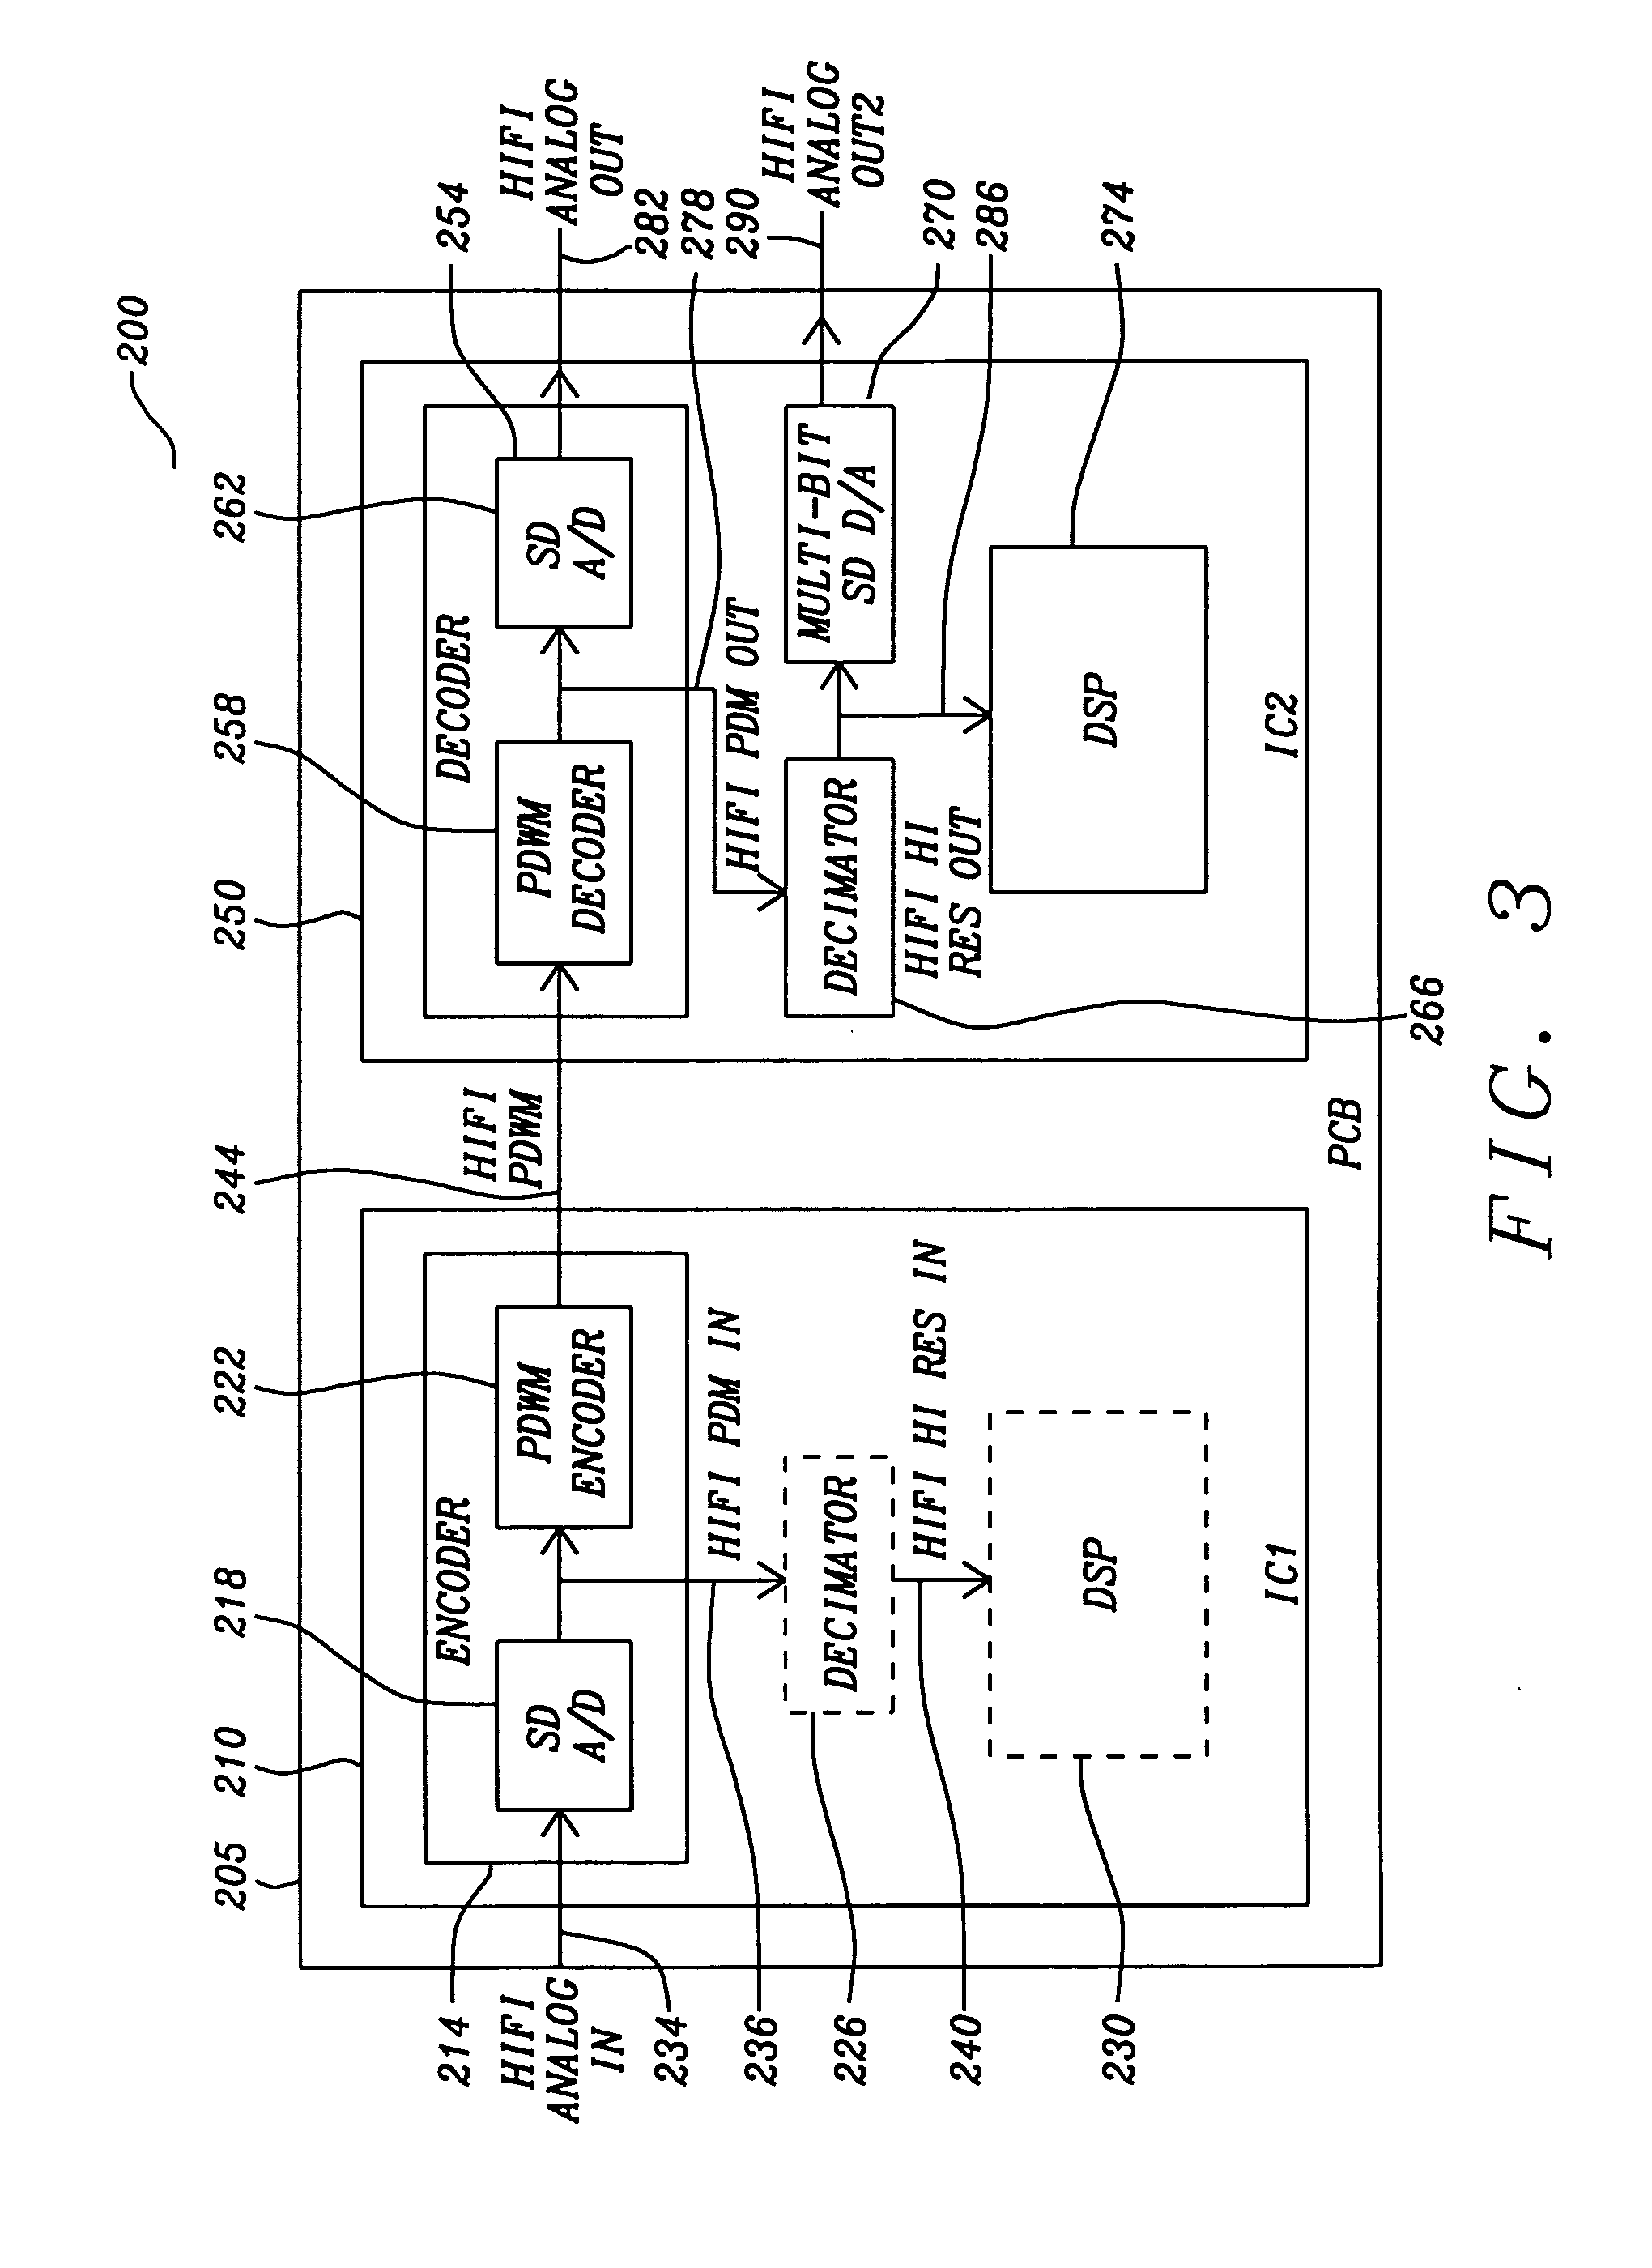 Device and method for the transmission and reception of high fidelity audio using a single wire